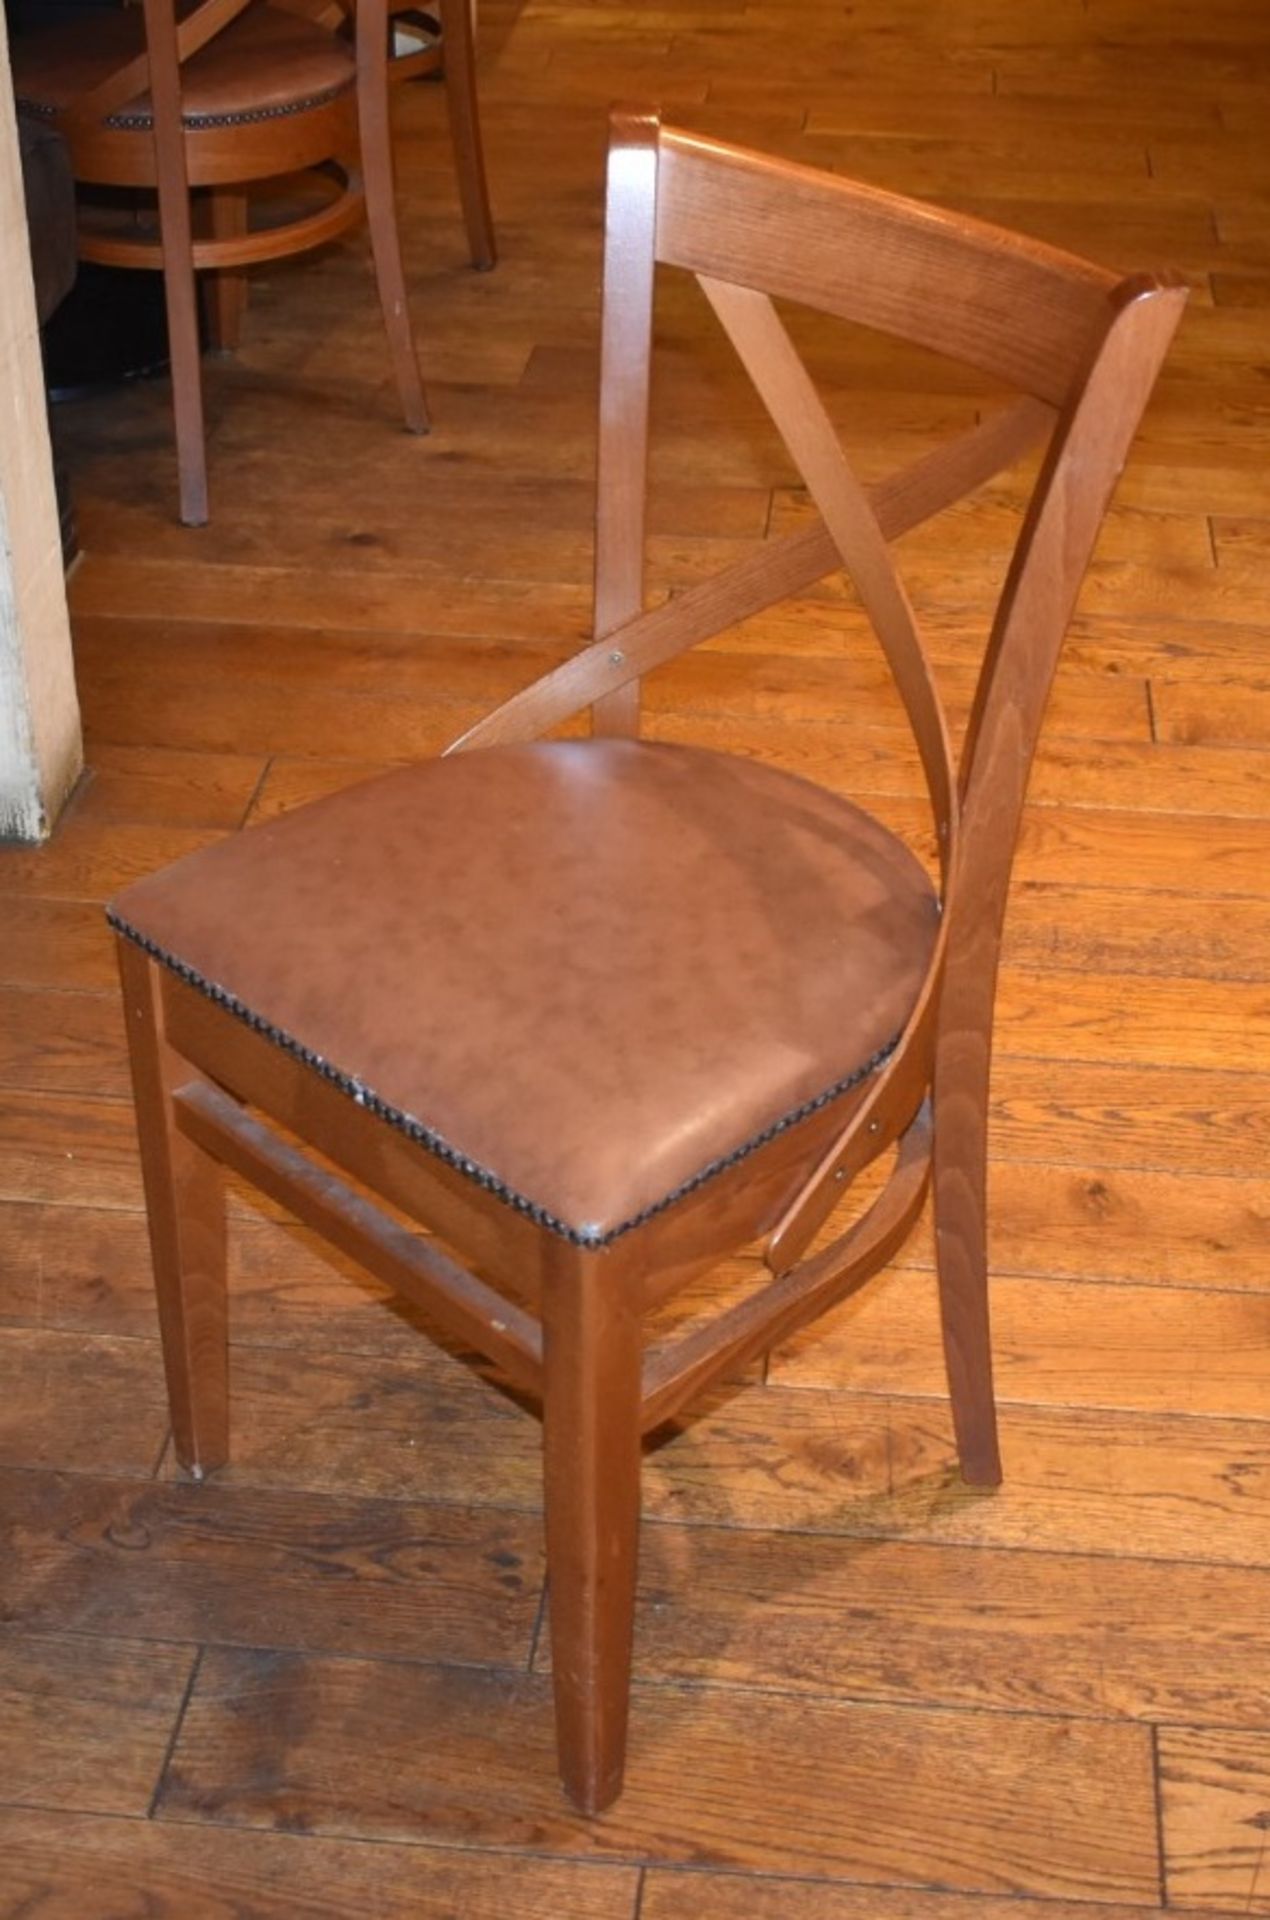 6 x Restaurant Dining Chairs With Wooden Crossbacks and Faux Leather Brown Seat Pads - H84 x W45 cms - Image 2 of 4